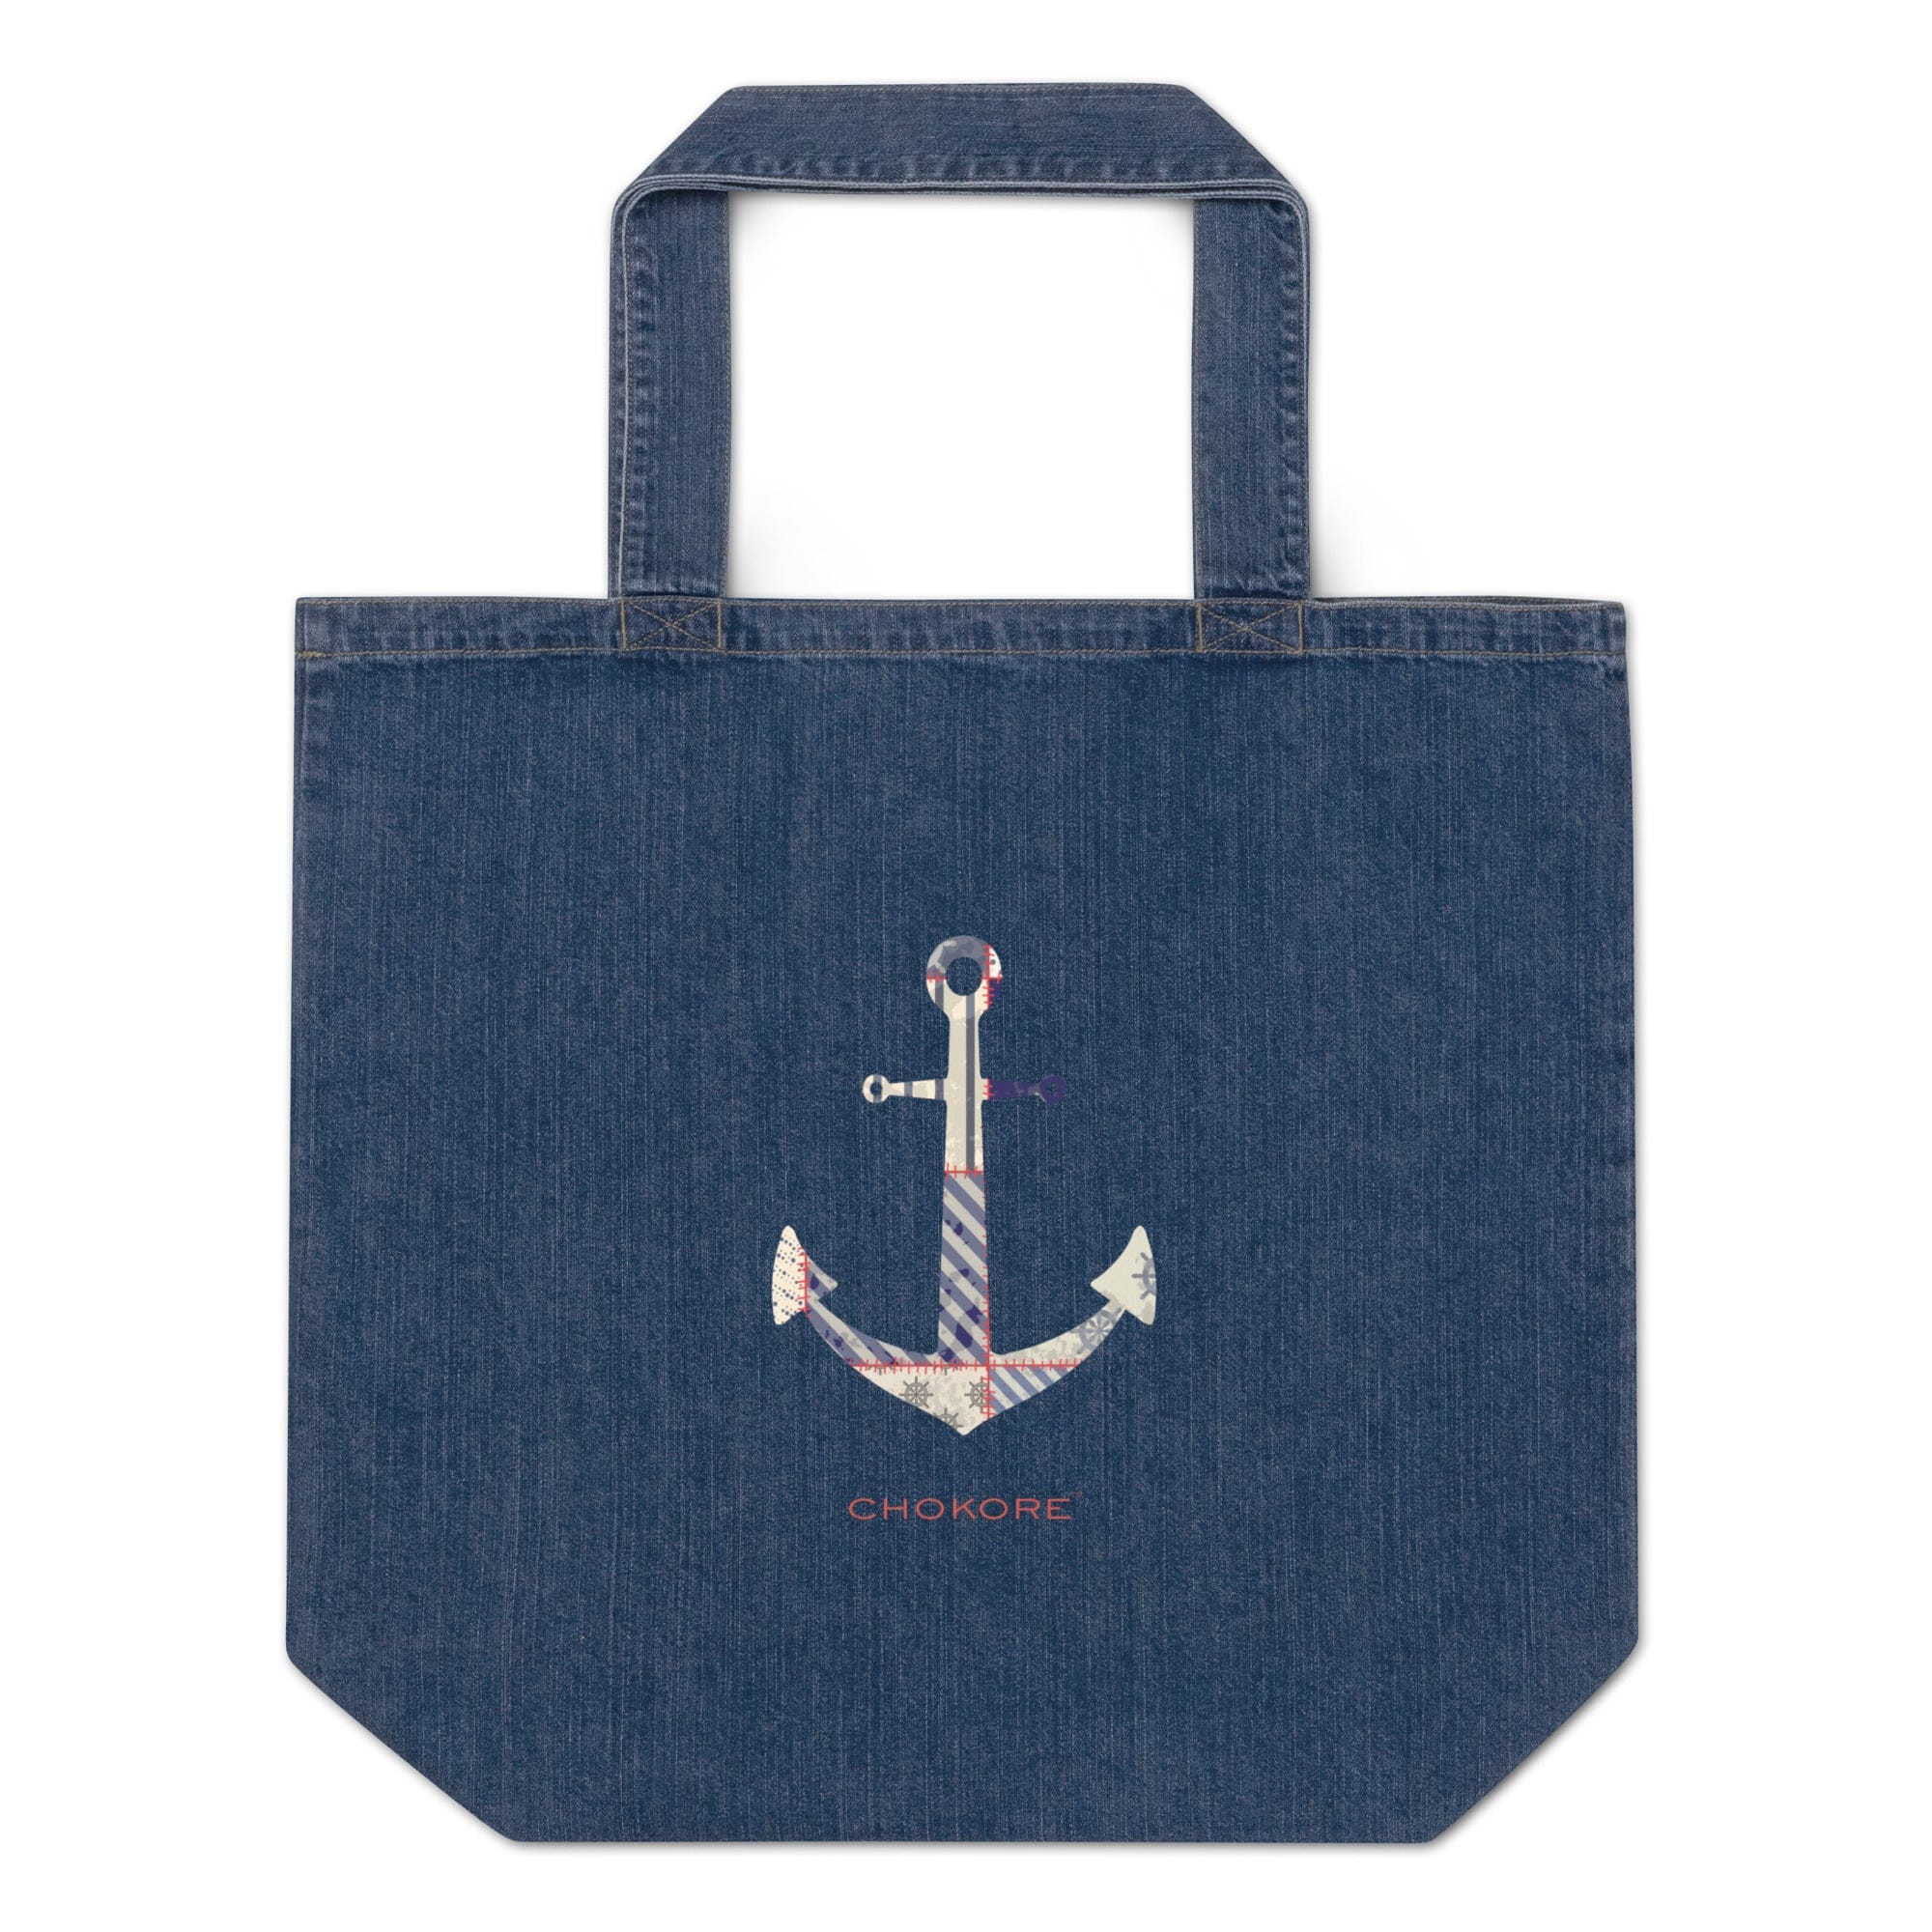 Sailing Blues Organic Denim Tote Bag. From the Marine collection.